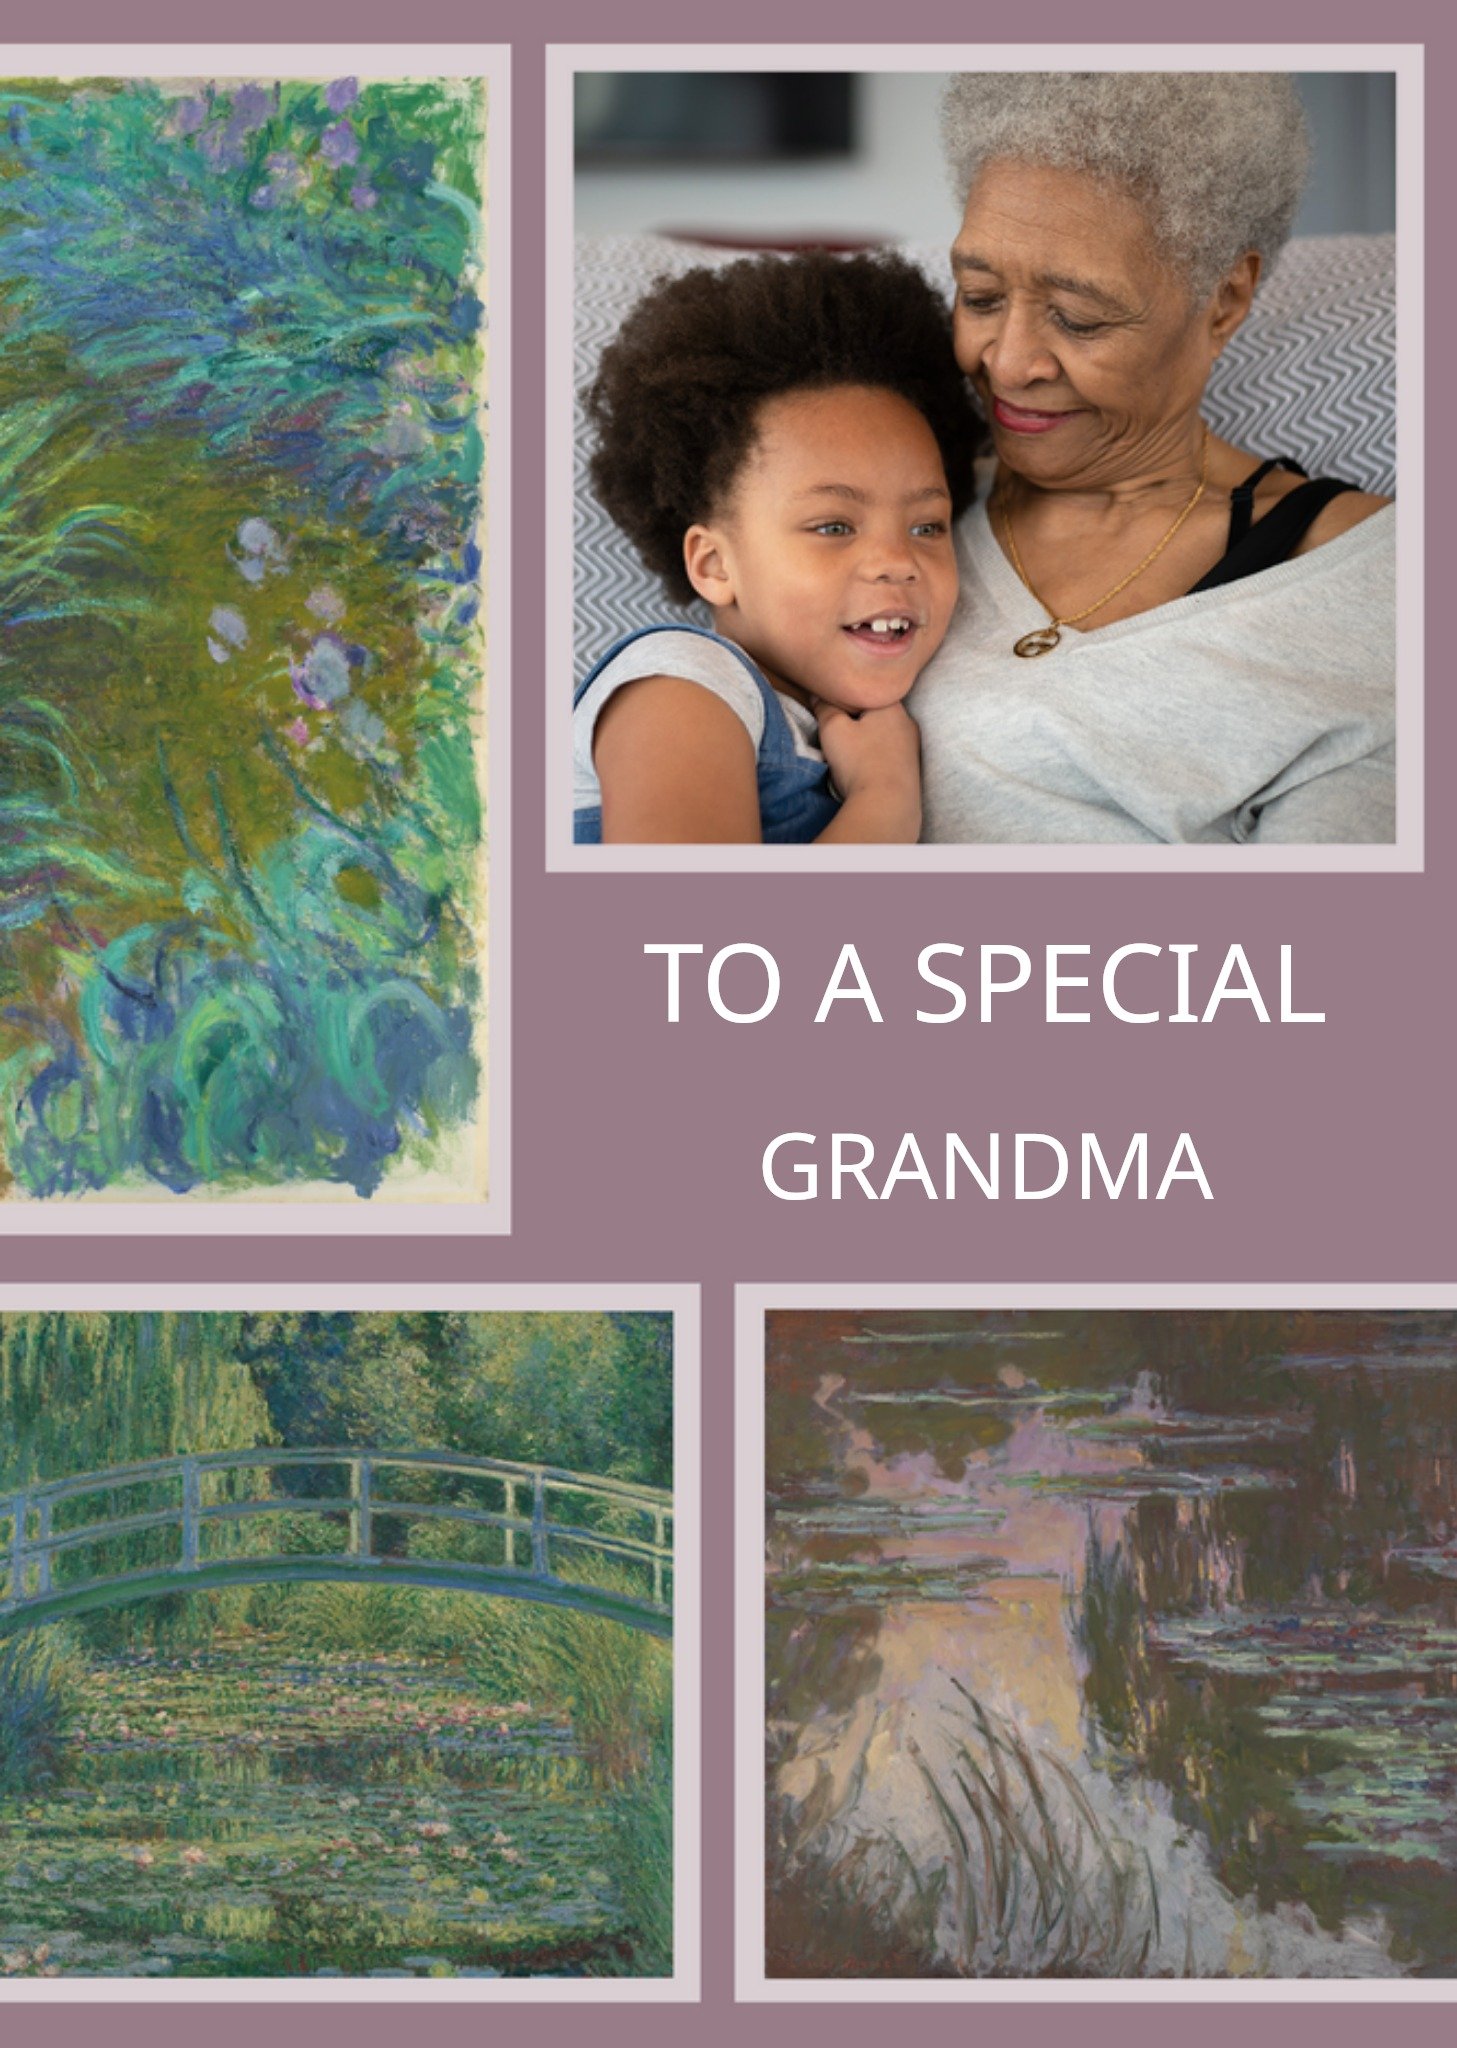 The National Gallery Claude Monet Special Grandma Photo Upload Birthday Card, Large